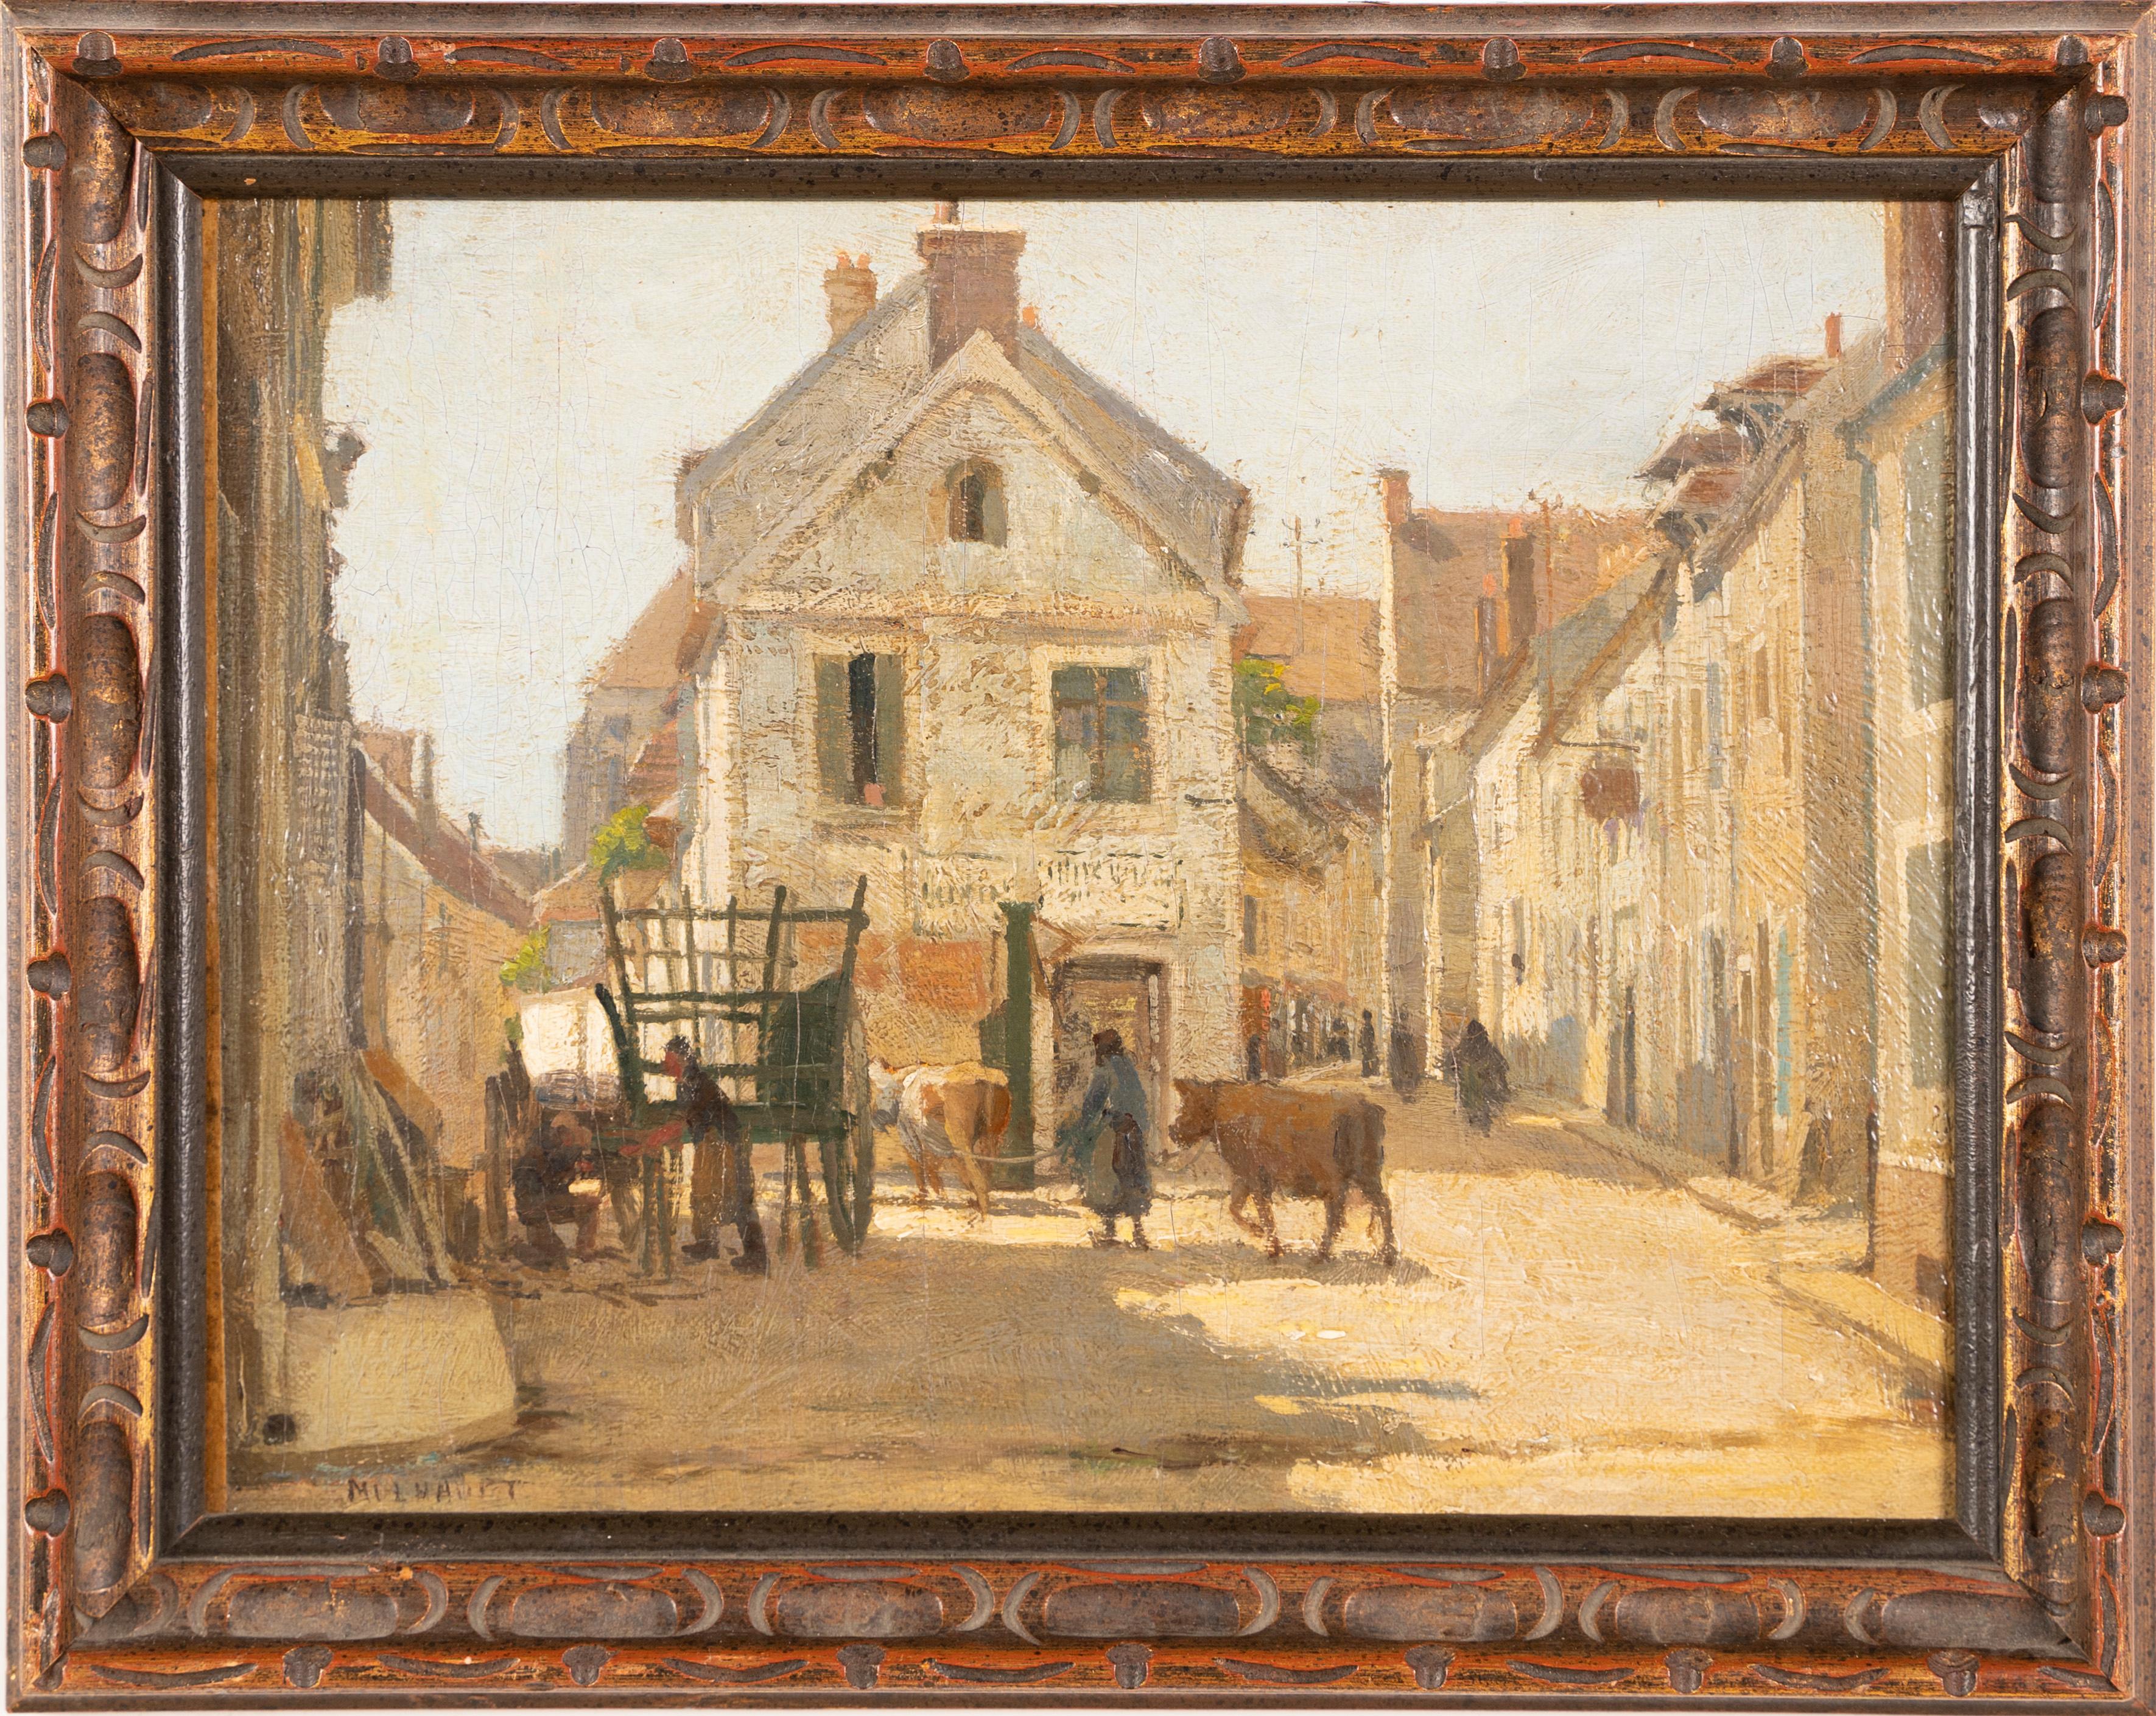 Antique American Impressionist Cityscape Signed Framed Market Oil Painting - Brown Landscape Painting by Frederick J. Mulhaupt